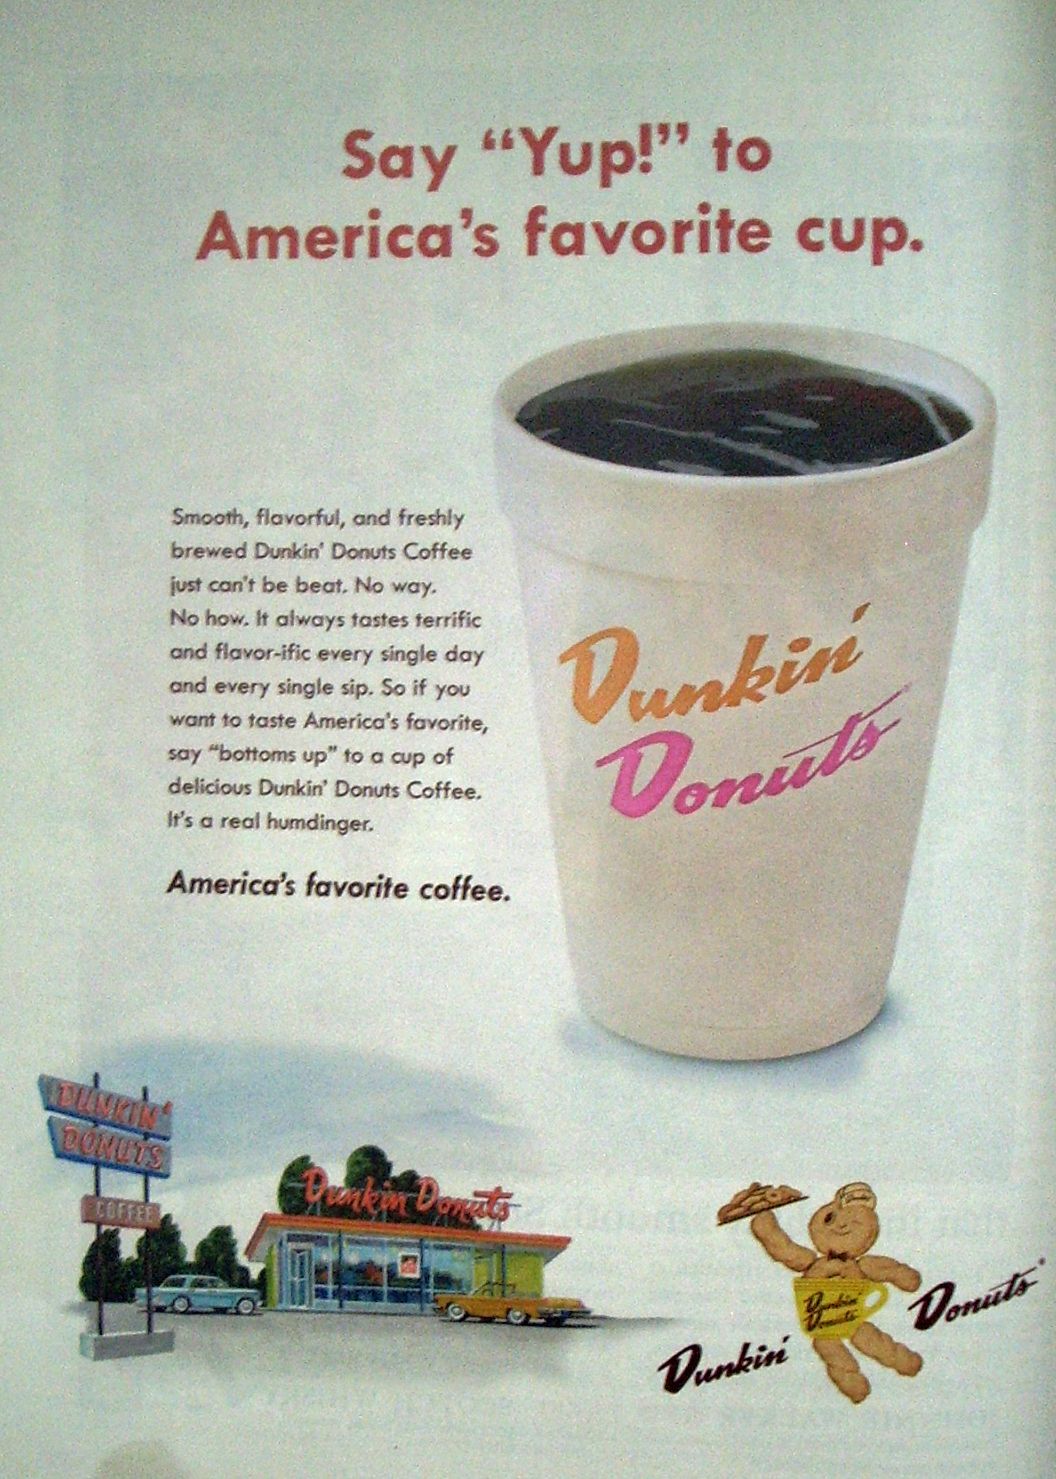 Dunkin Donuts made franchising more widely acceptable and really revolutionized franchising. In 1996 a DD university was established for all franchise owners